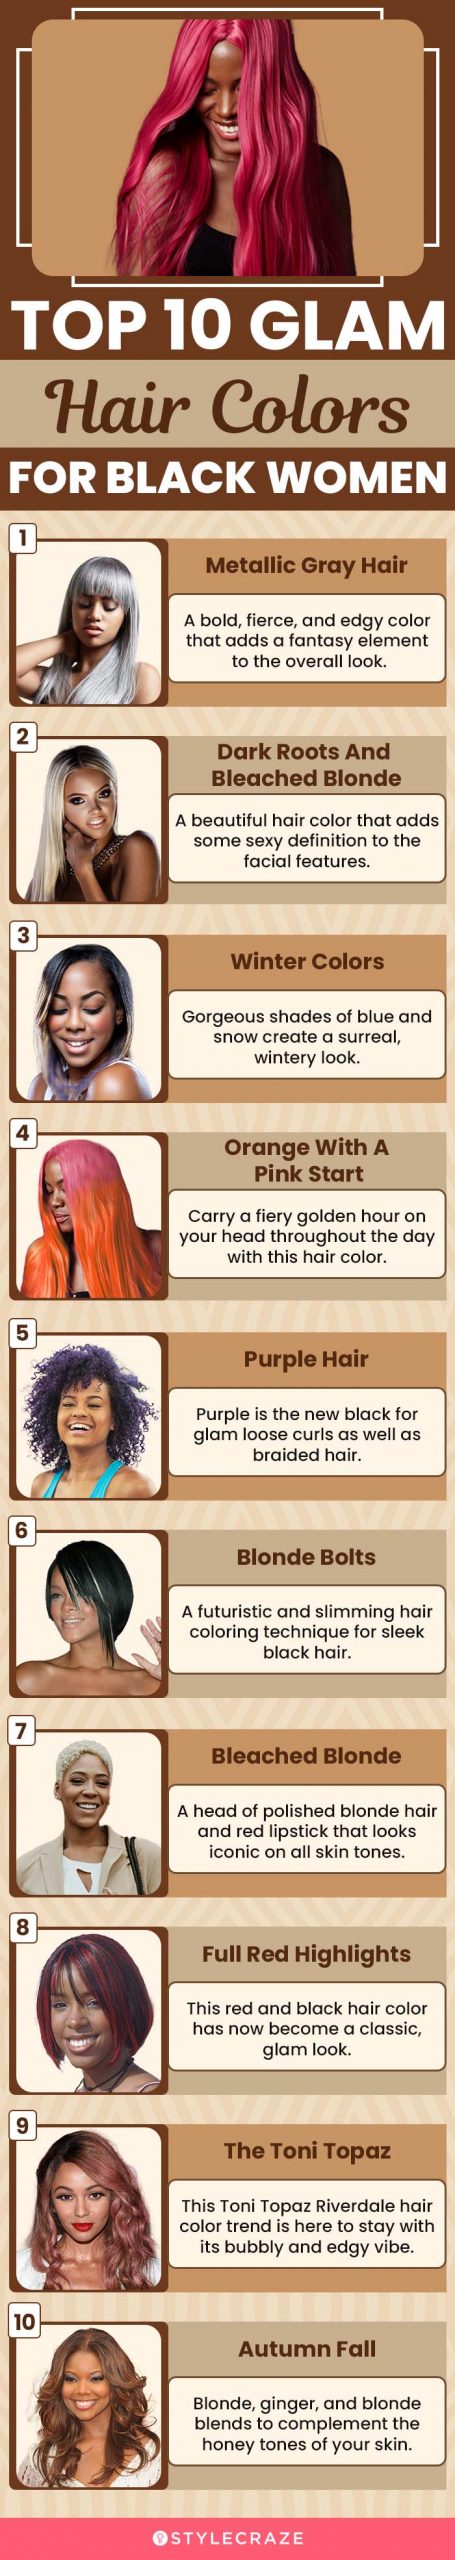 top 10 glam hair colors for black women (infographic)